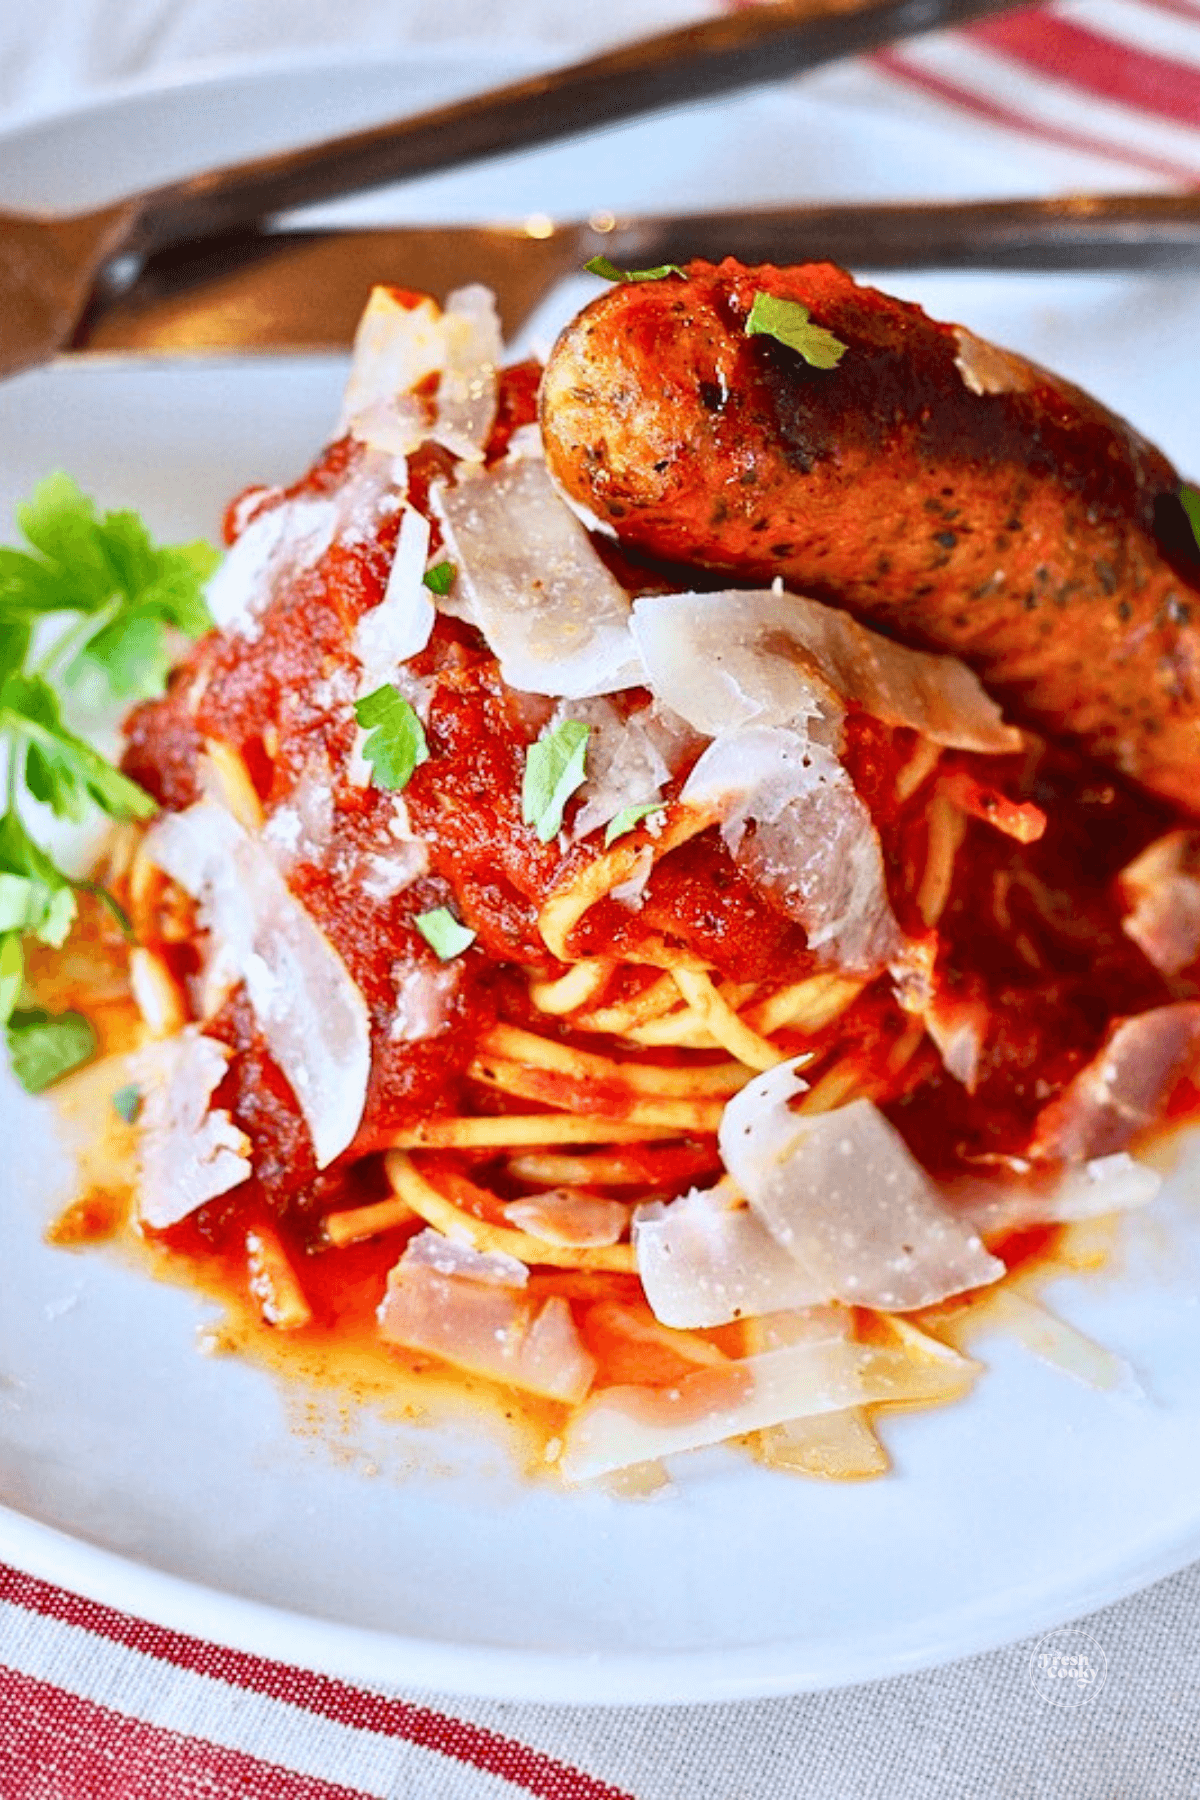 Plate of spaghetti swirled with rich Italian spaghetti sauce and topped with shaved parmesan and a sausage.